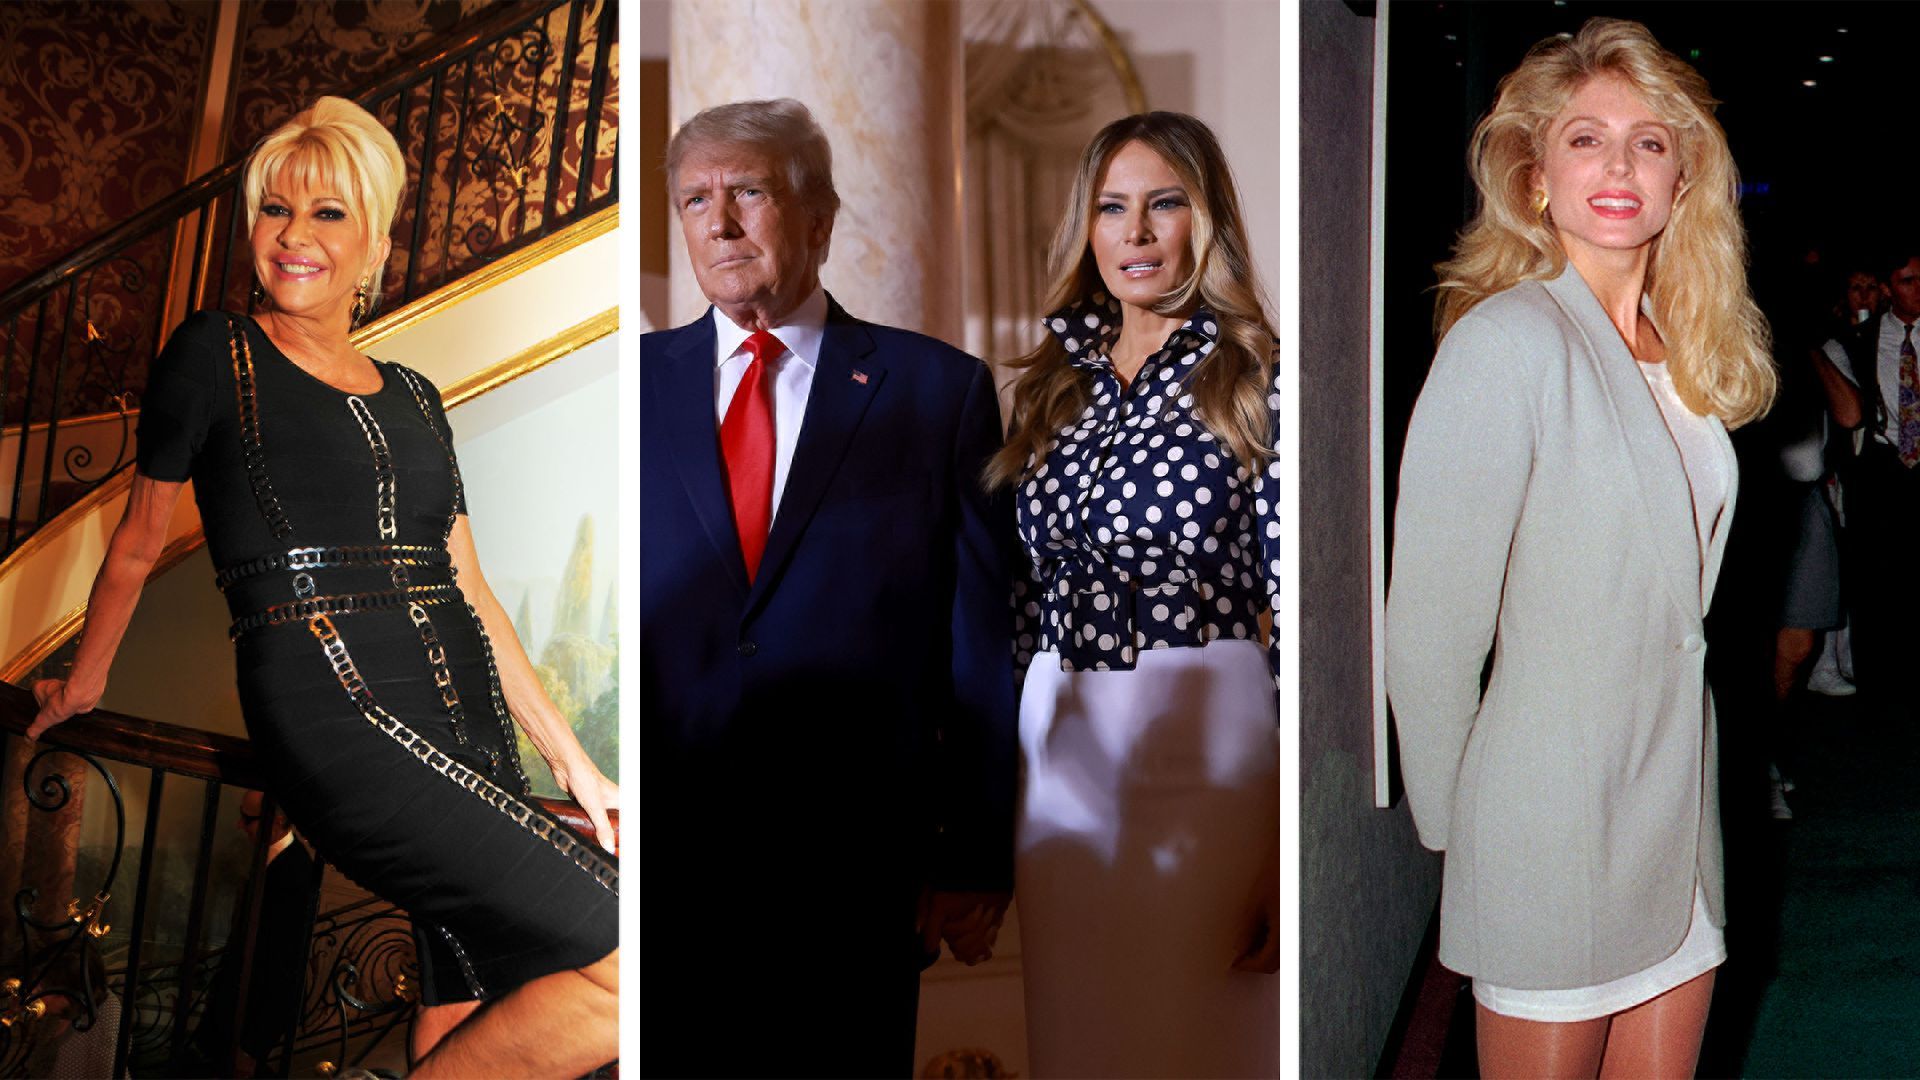 Inside Donald Trump’s 3 marriages — who are Ivana Trump, Marla Maples and Melania Trump